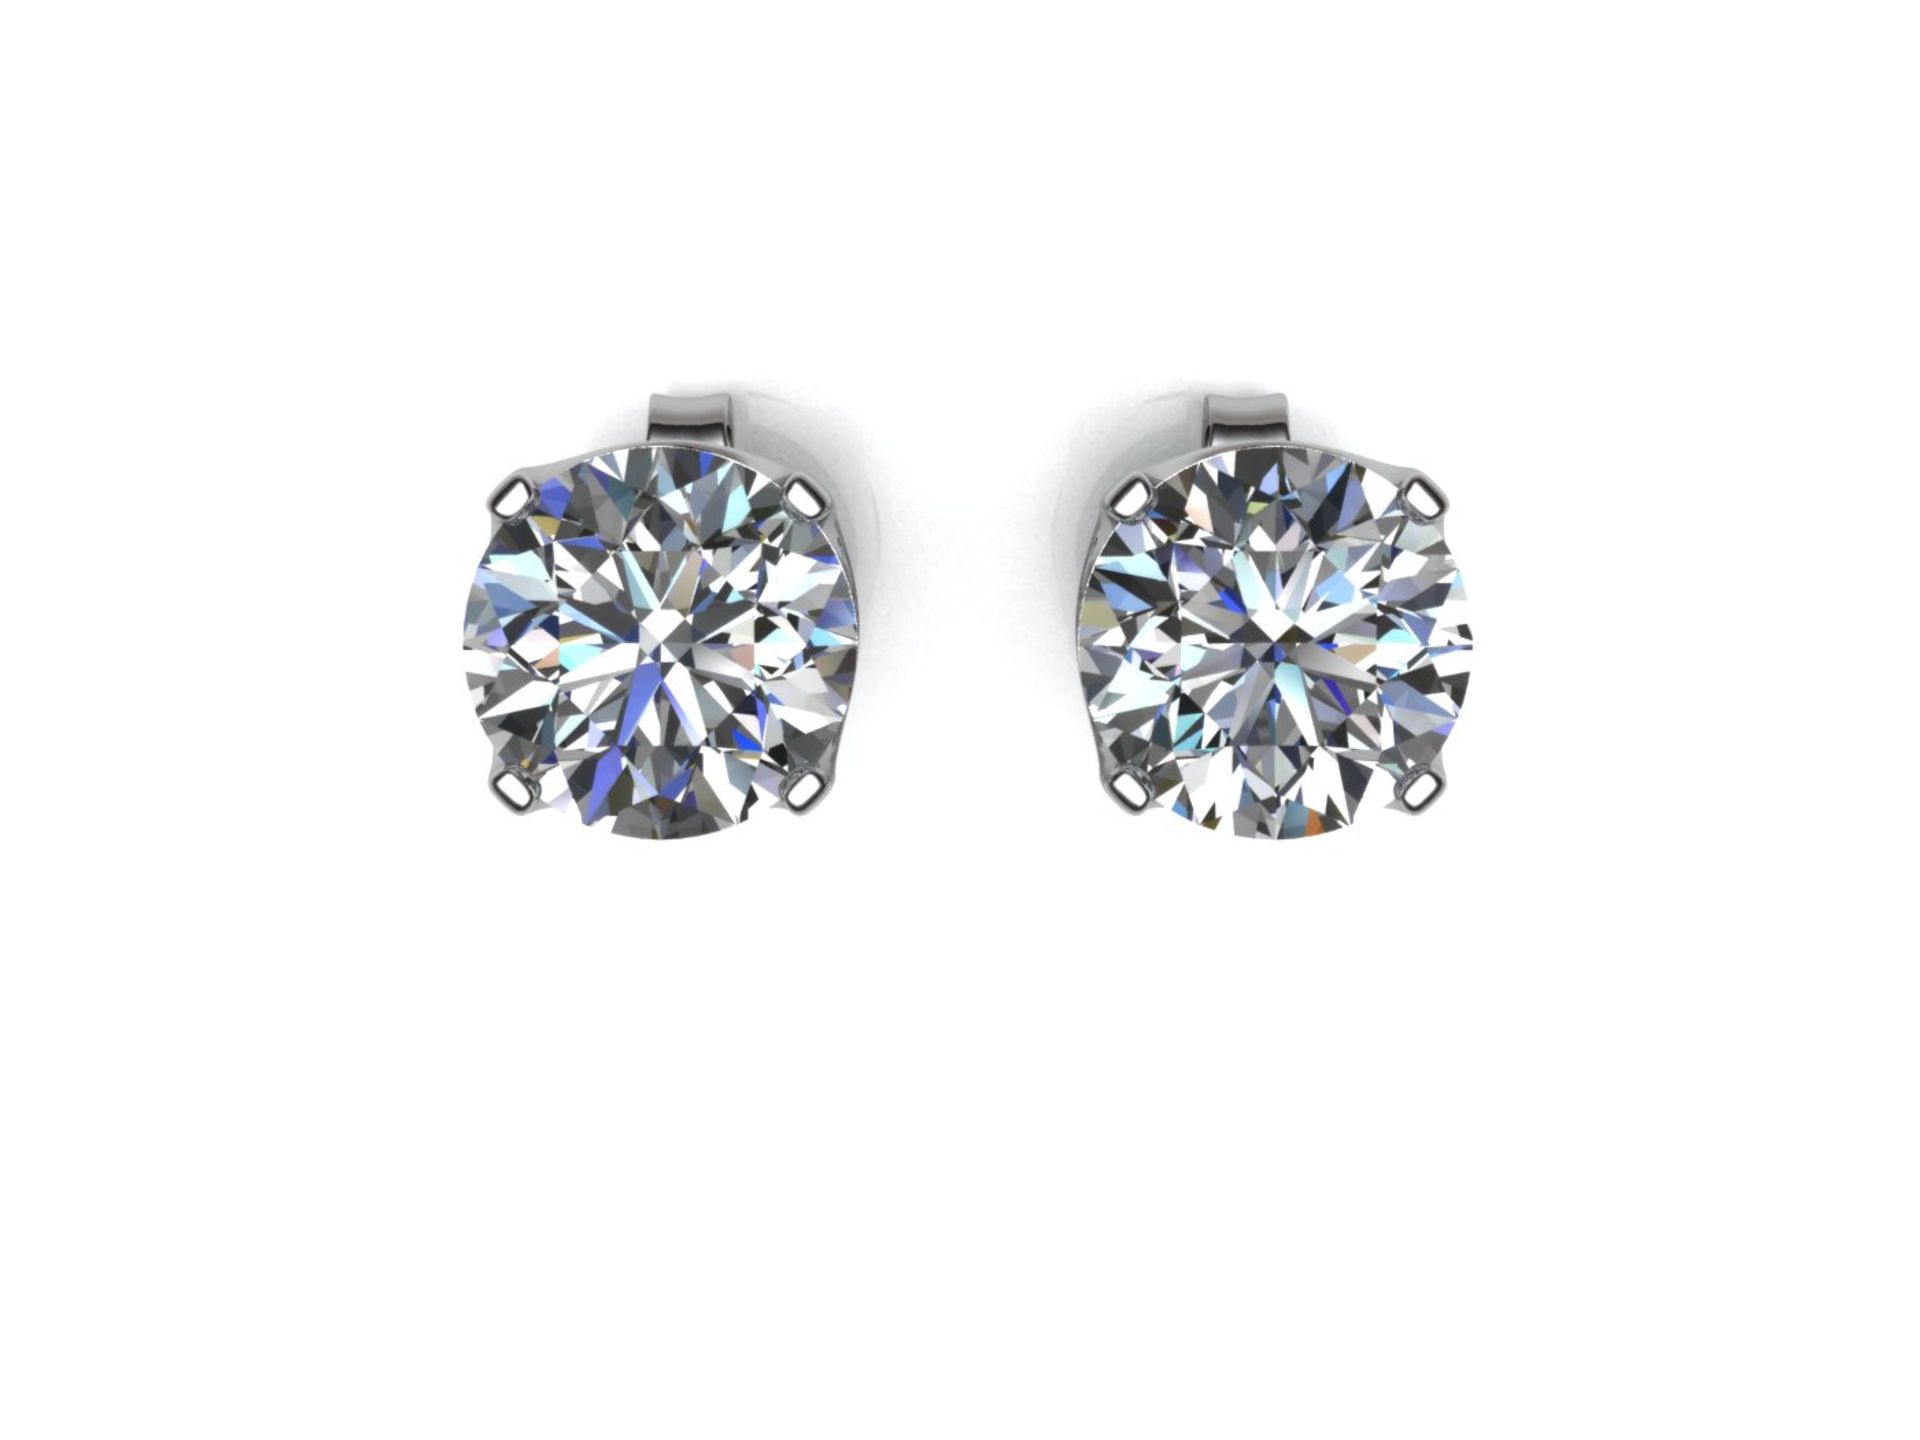 9ct White Gold Four Diamond Earring 0.25 Carats - Valued By GIE £3,020.00 - Two round brilliant